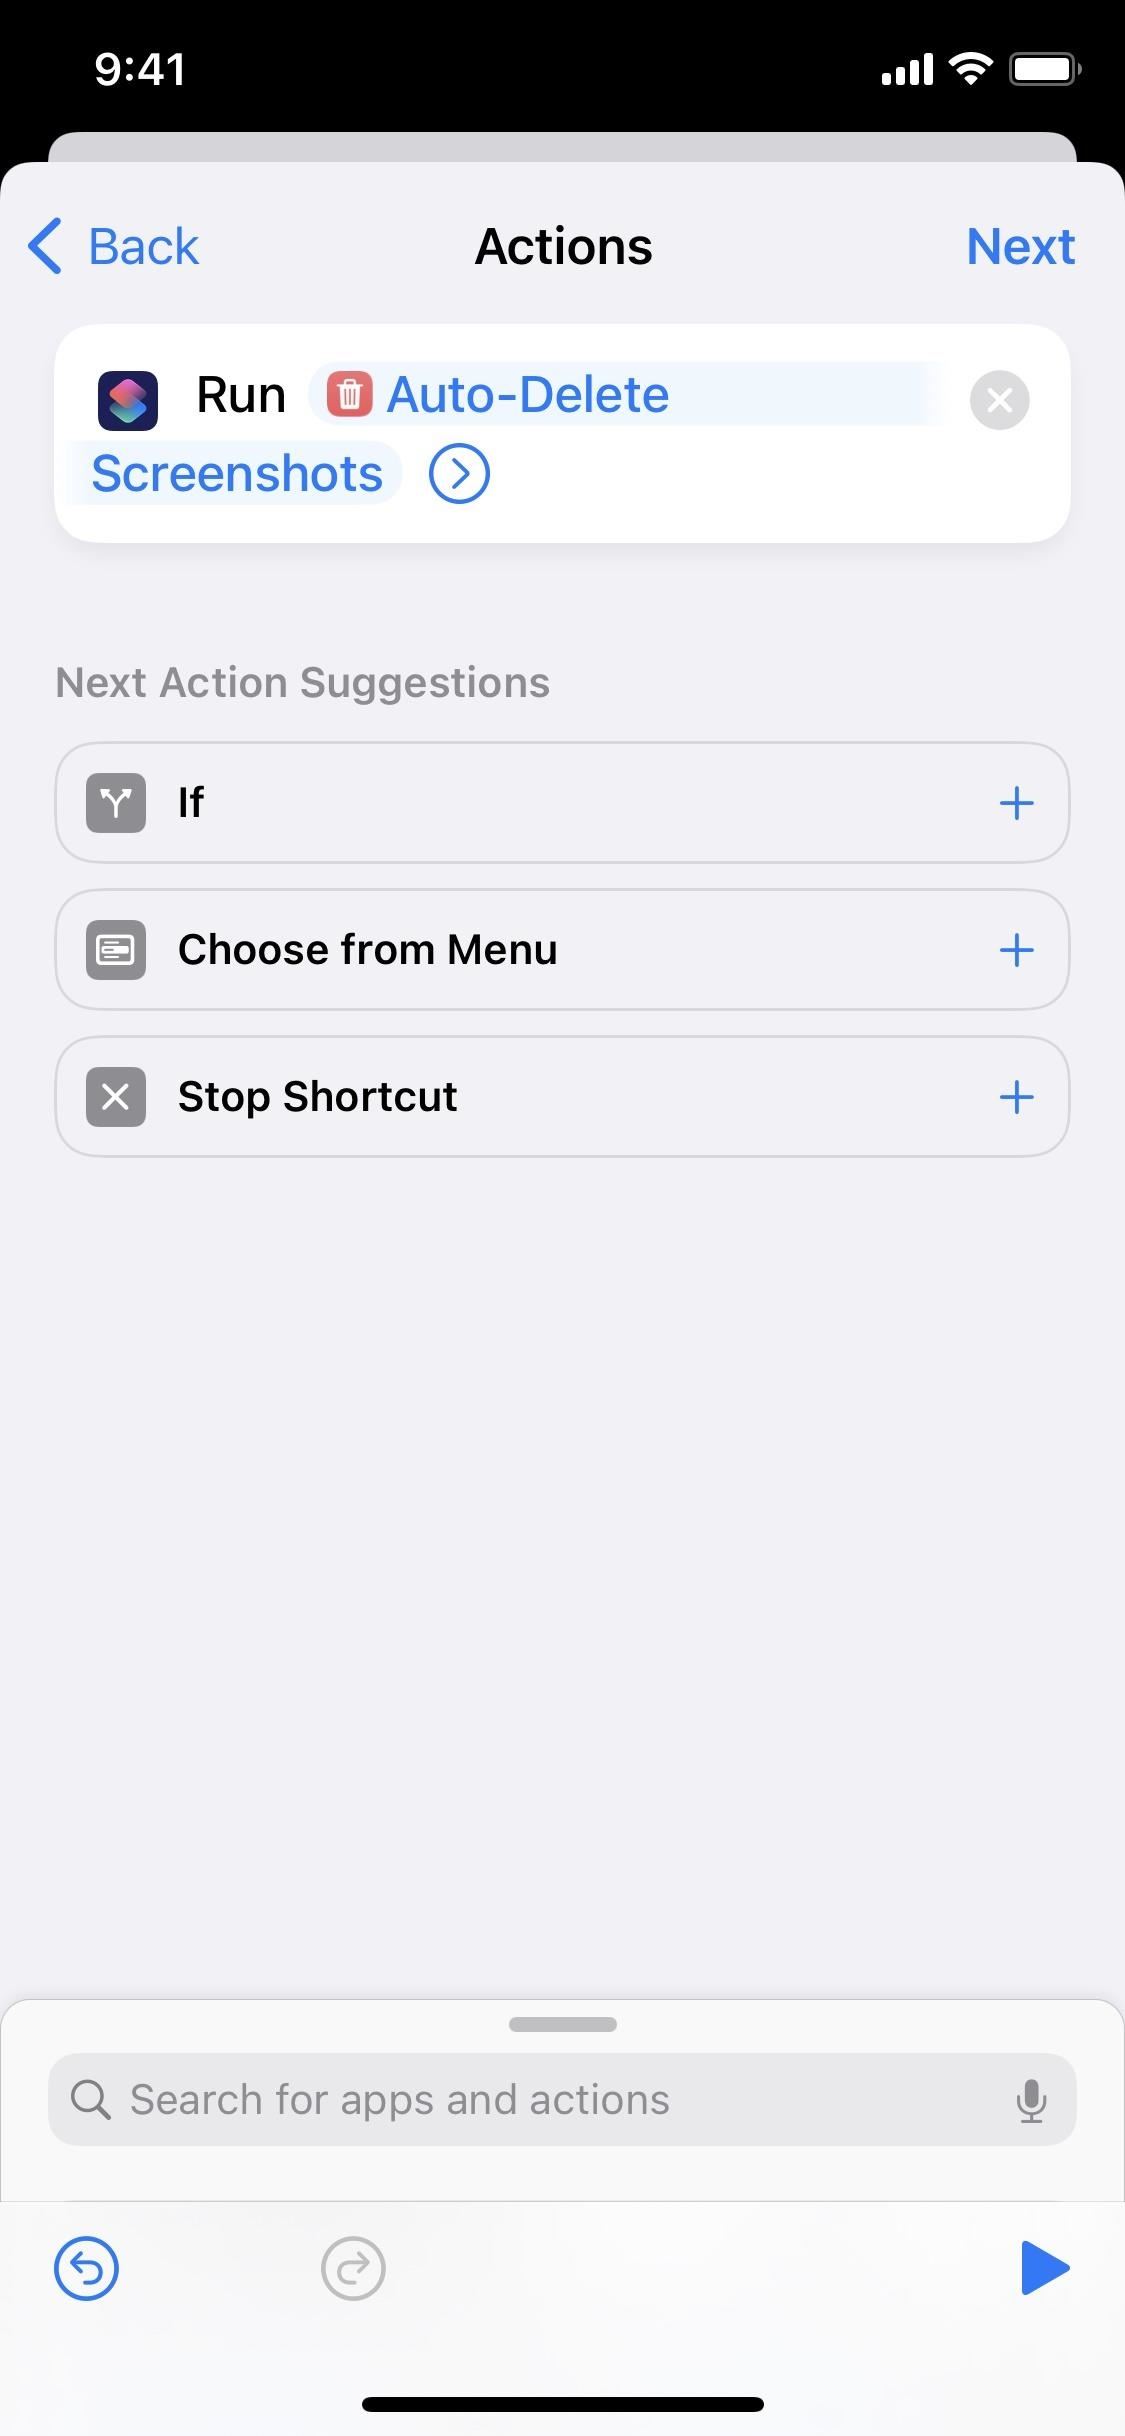 Make Your iPhone Auto-Delete Old Screenshots So Your Photos App Doesn't Become a Hot Mess